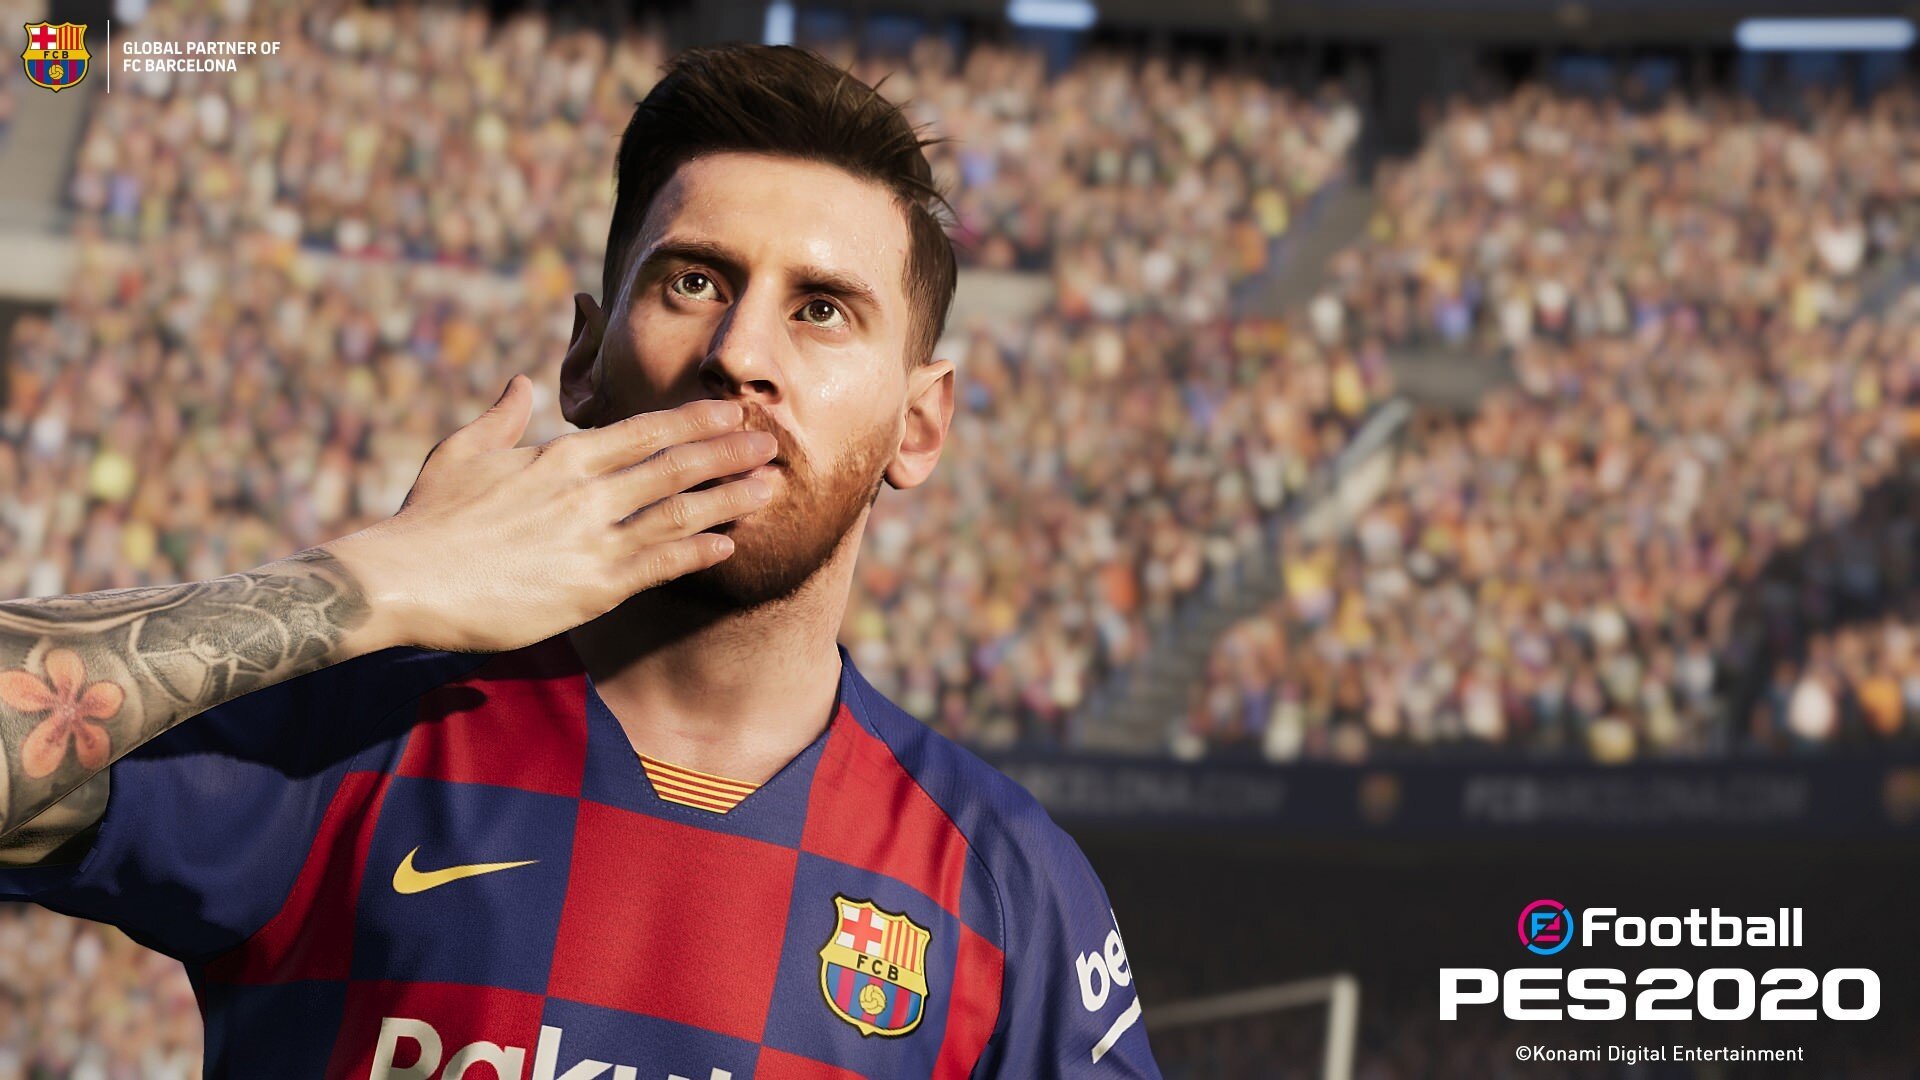 eFootball Pro Evolution Soccer 2020 Review (Xbox One)